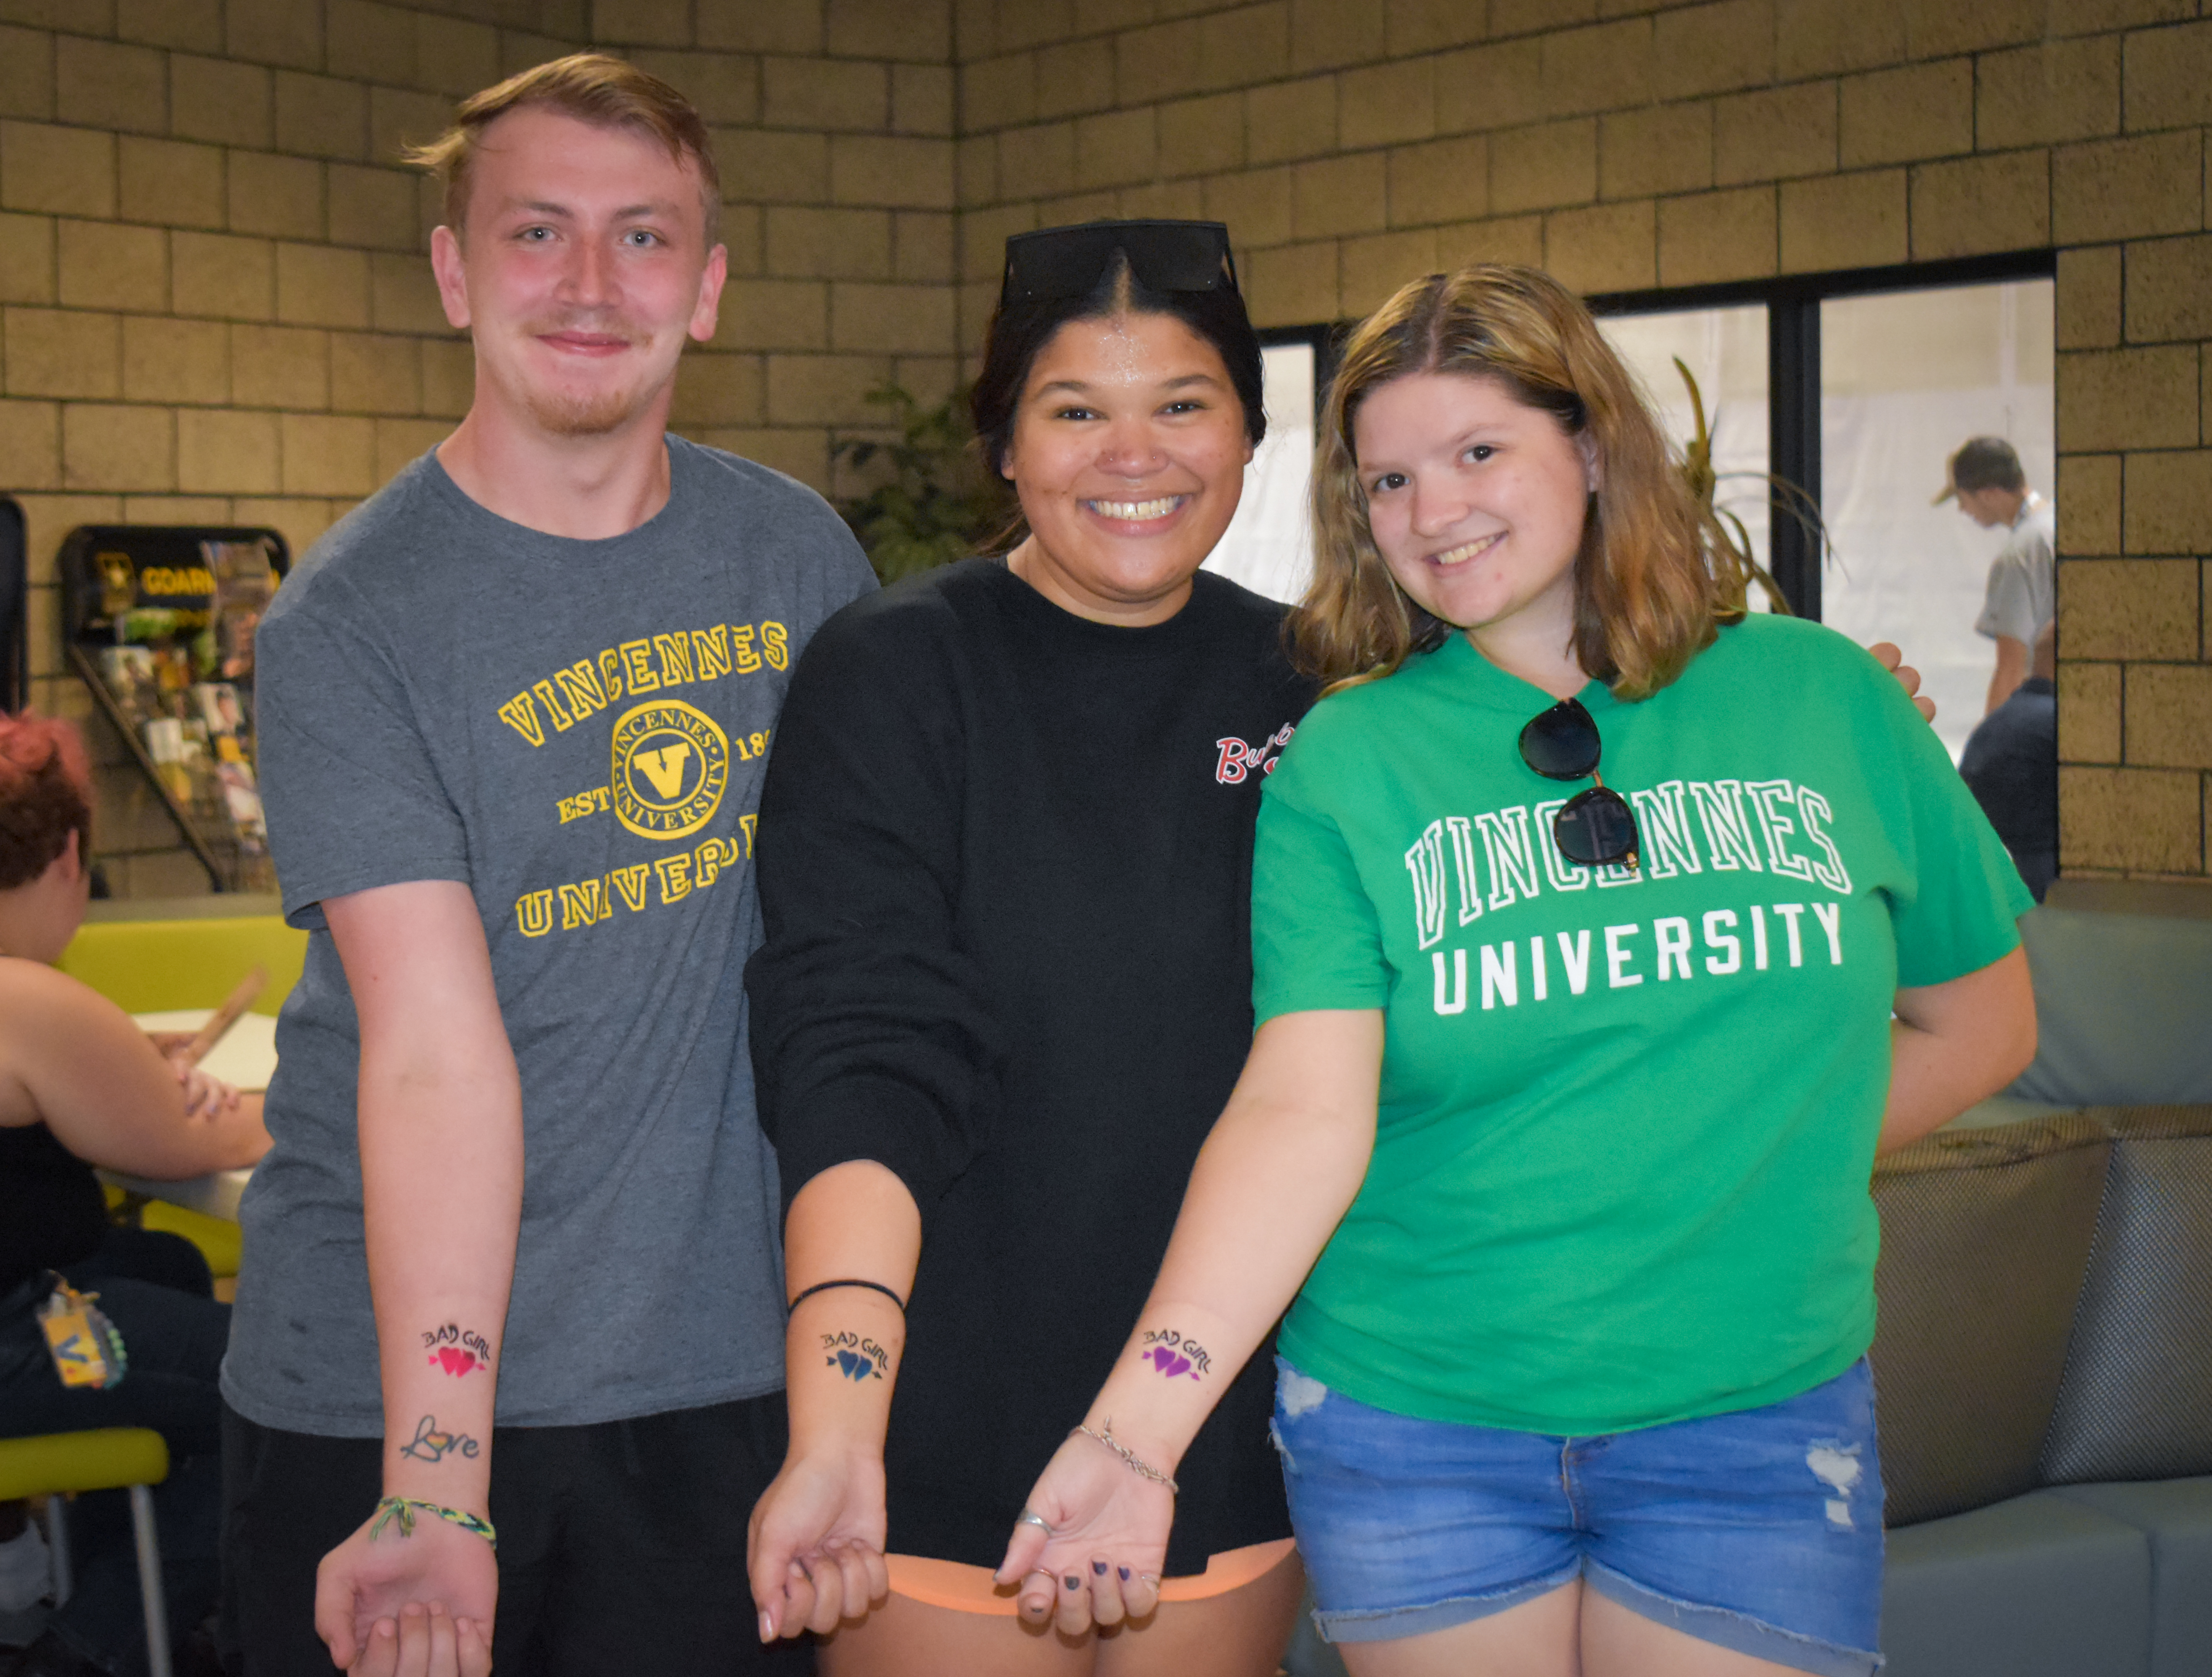 VU students show off temporary tattoos at Roc the Rec.